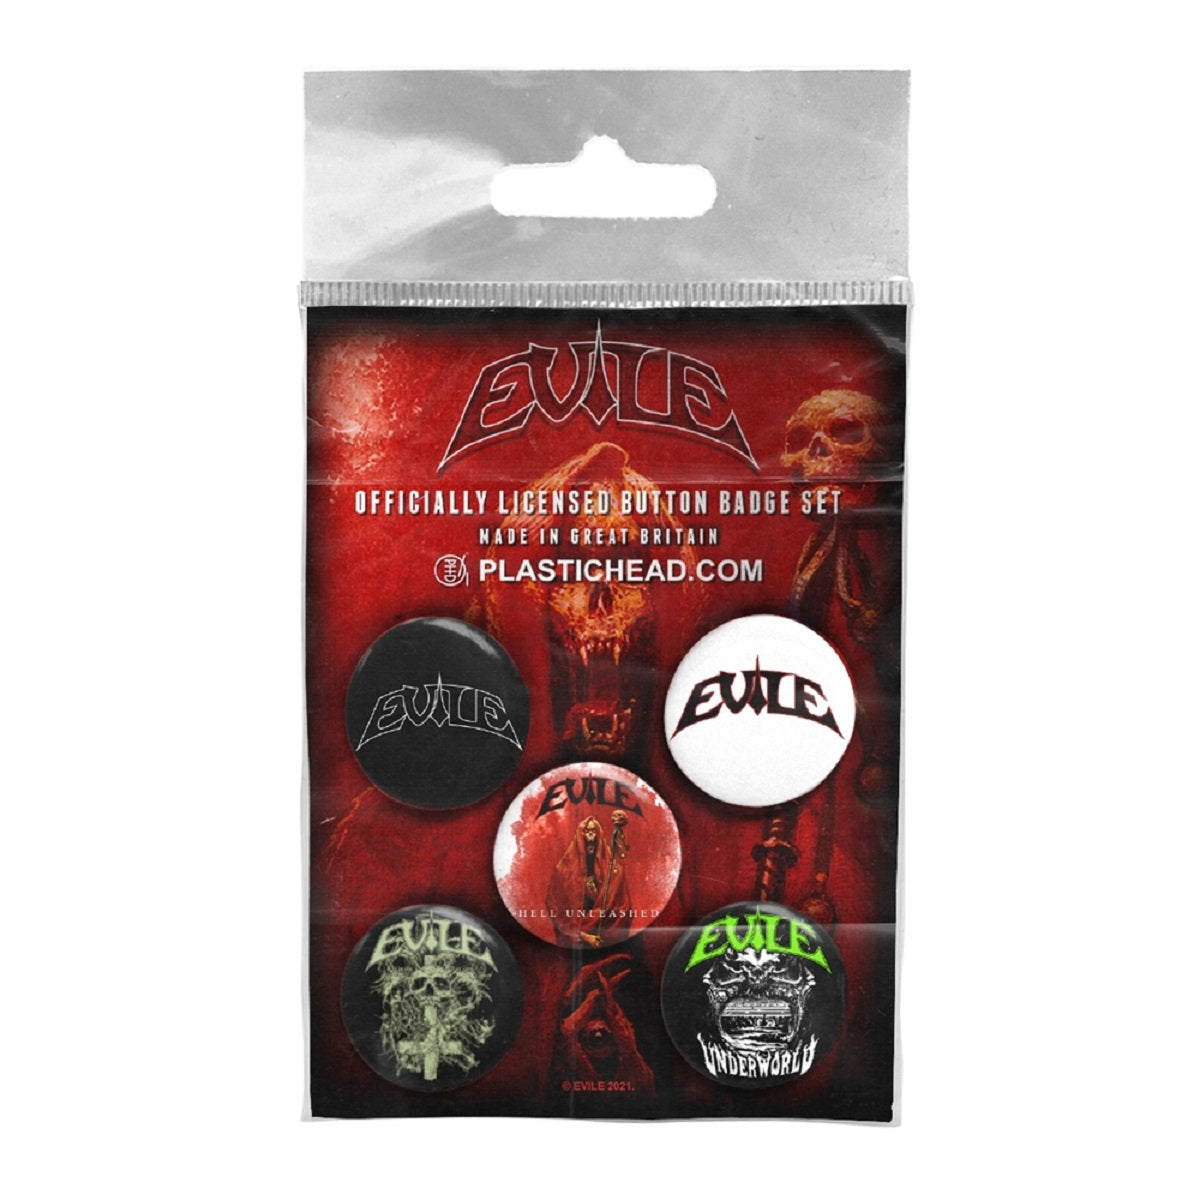 Evile "Hell Unleashed" Button Pack